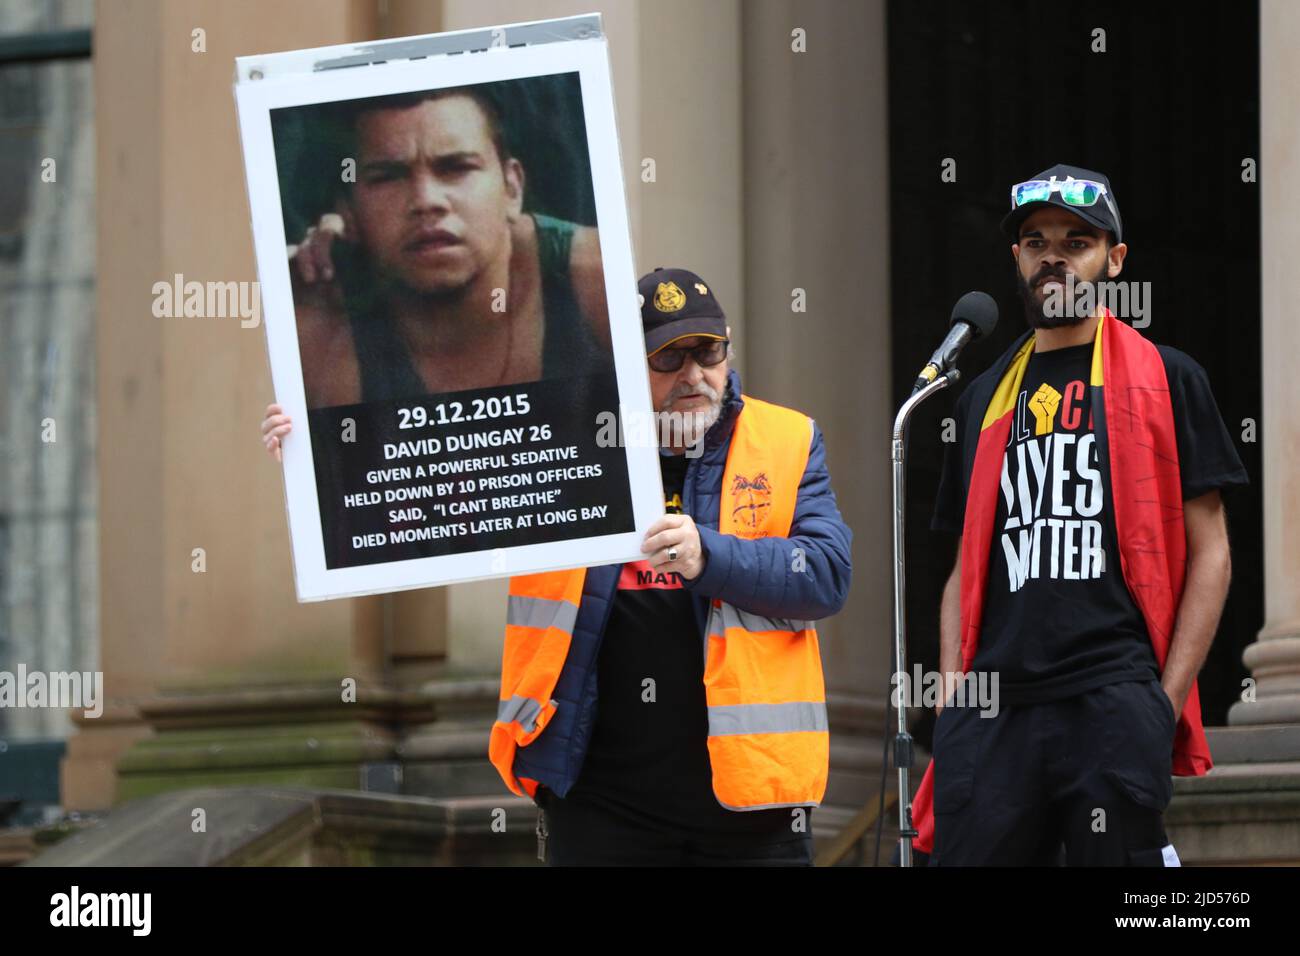 Sydney, Australia. 18th June 2022. Protesters outside Sydney Town Hall against armed police in indigenous communities. Pictured: Paul Silva nephew of David Dungay Junior speaks at the rally. Credit: Richard Milnes/Alamy Live News Stock Photo